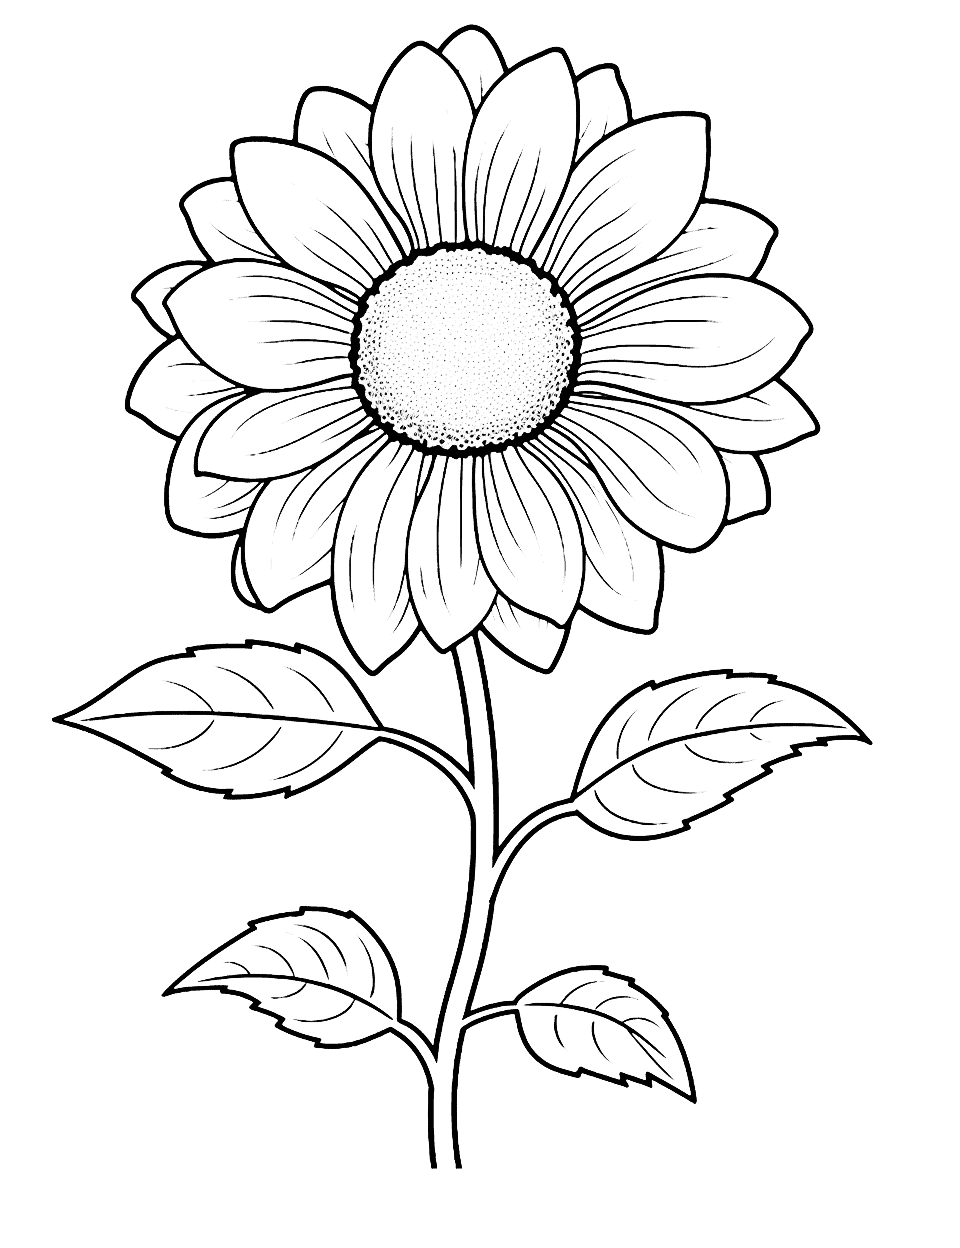 Cool and Advanced Sunflower Drawing Flower Coloring Page - An intricately designed sunflower for advanced colorists.